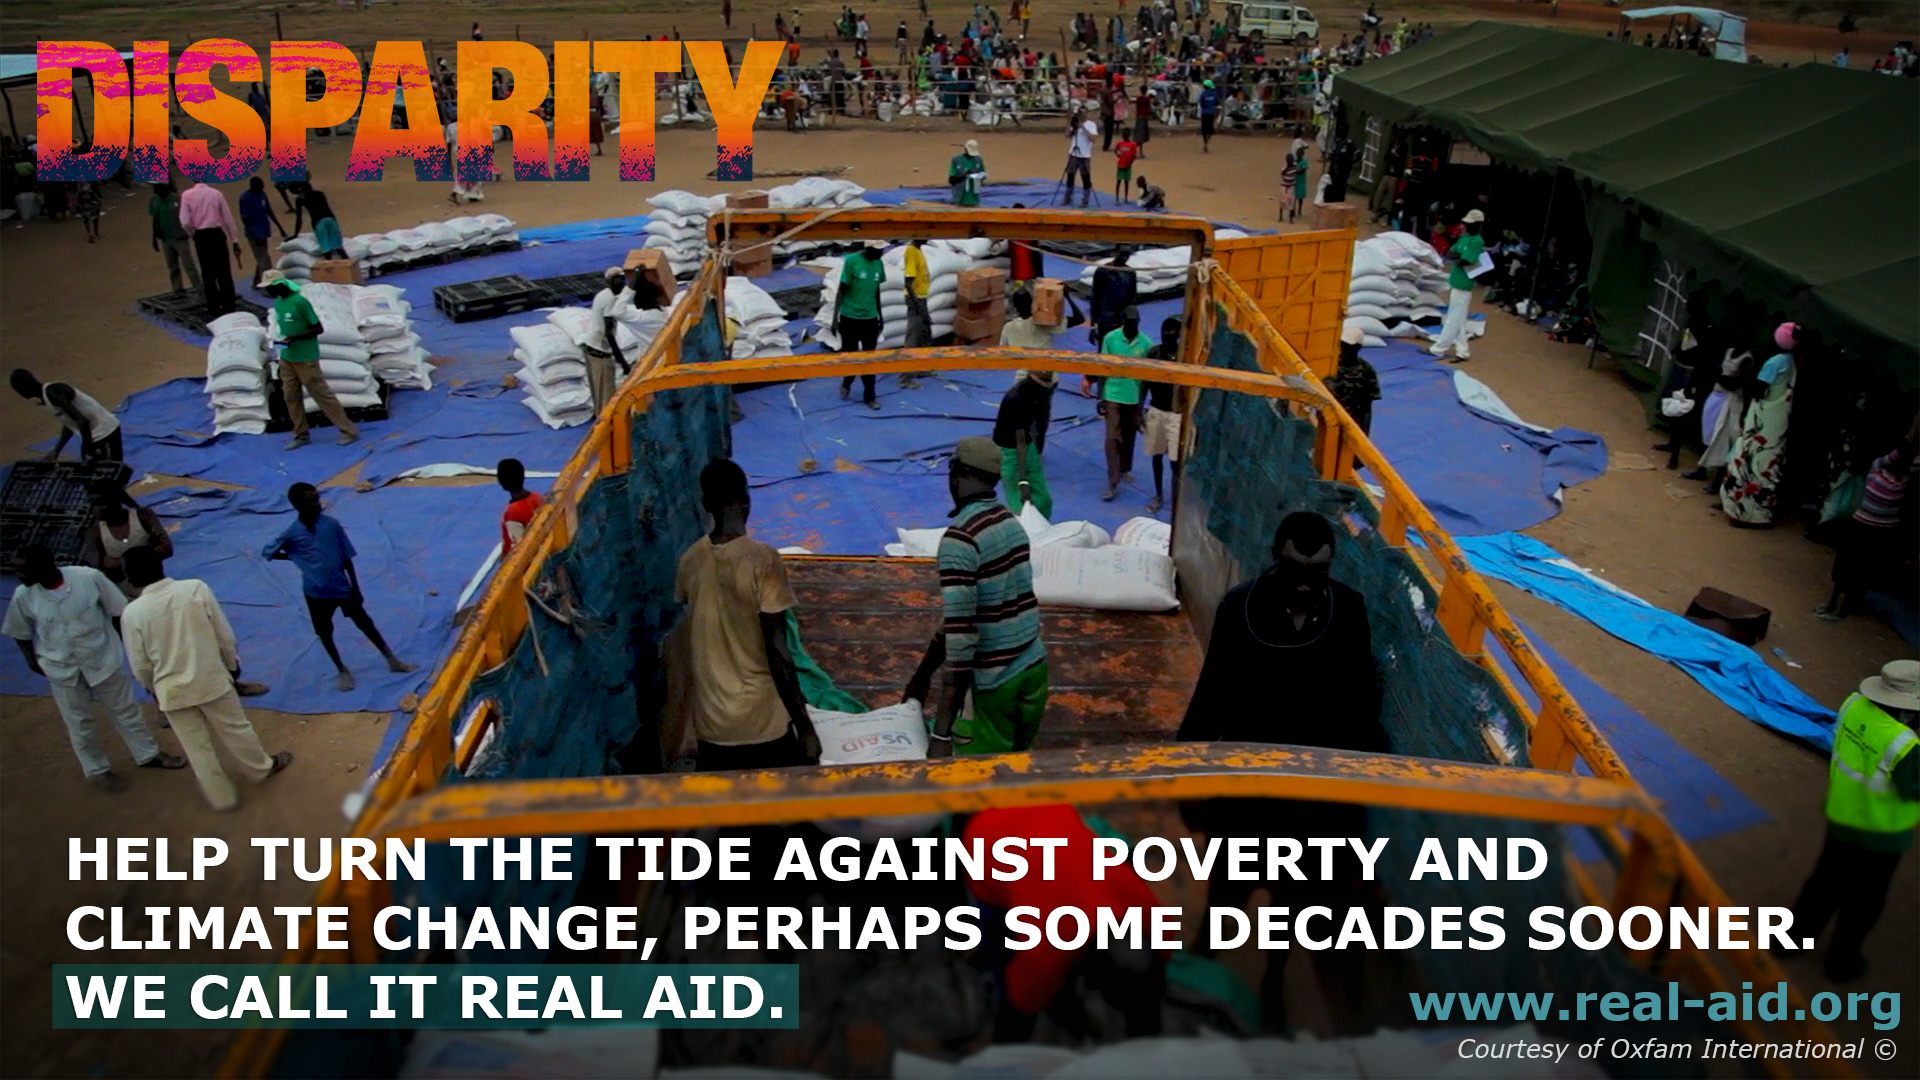 Disparity Film poster, help turn the tide against poverty and climate change text, aid being distributed from truck image